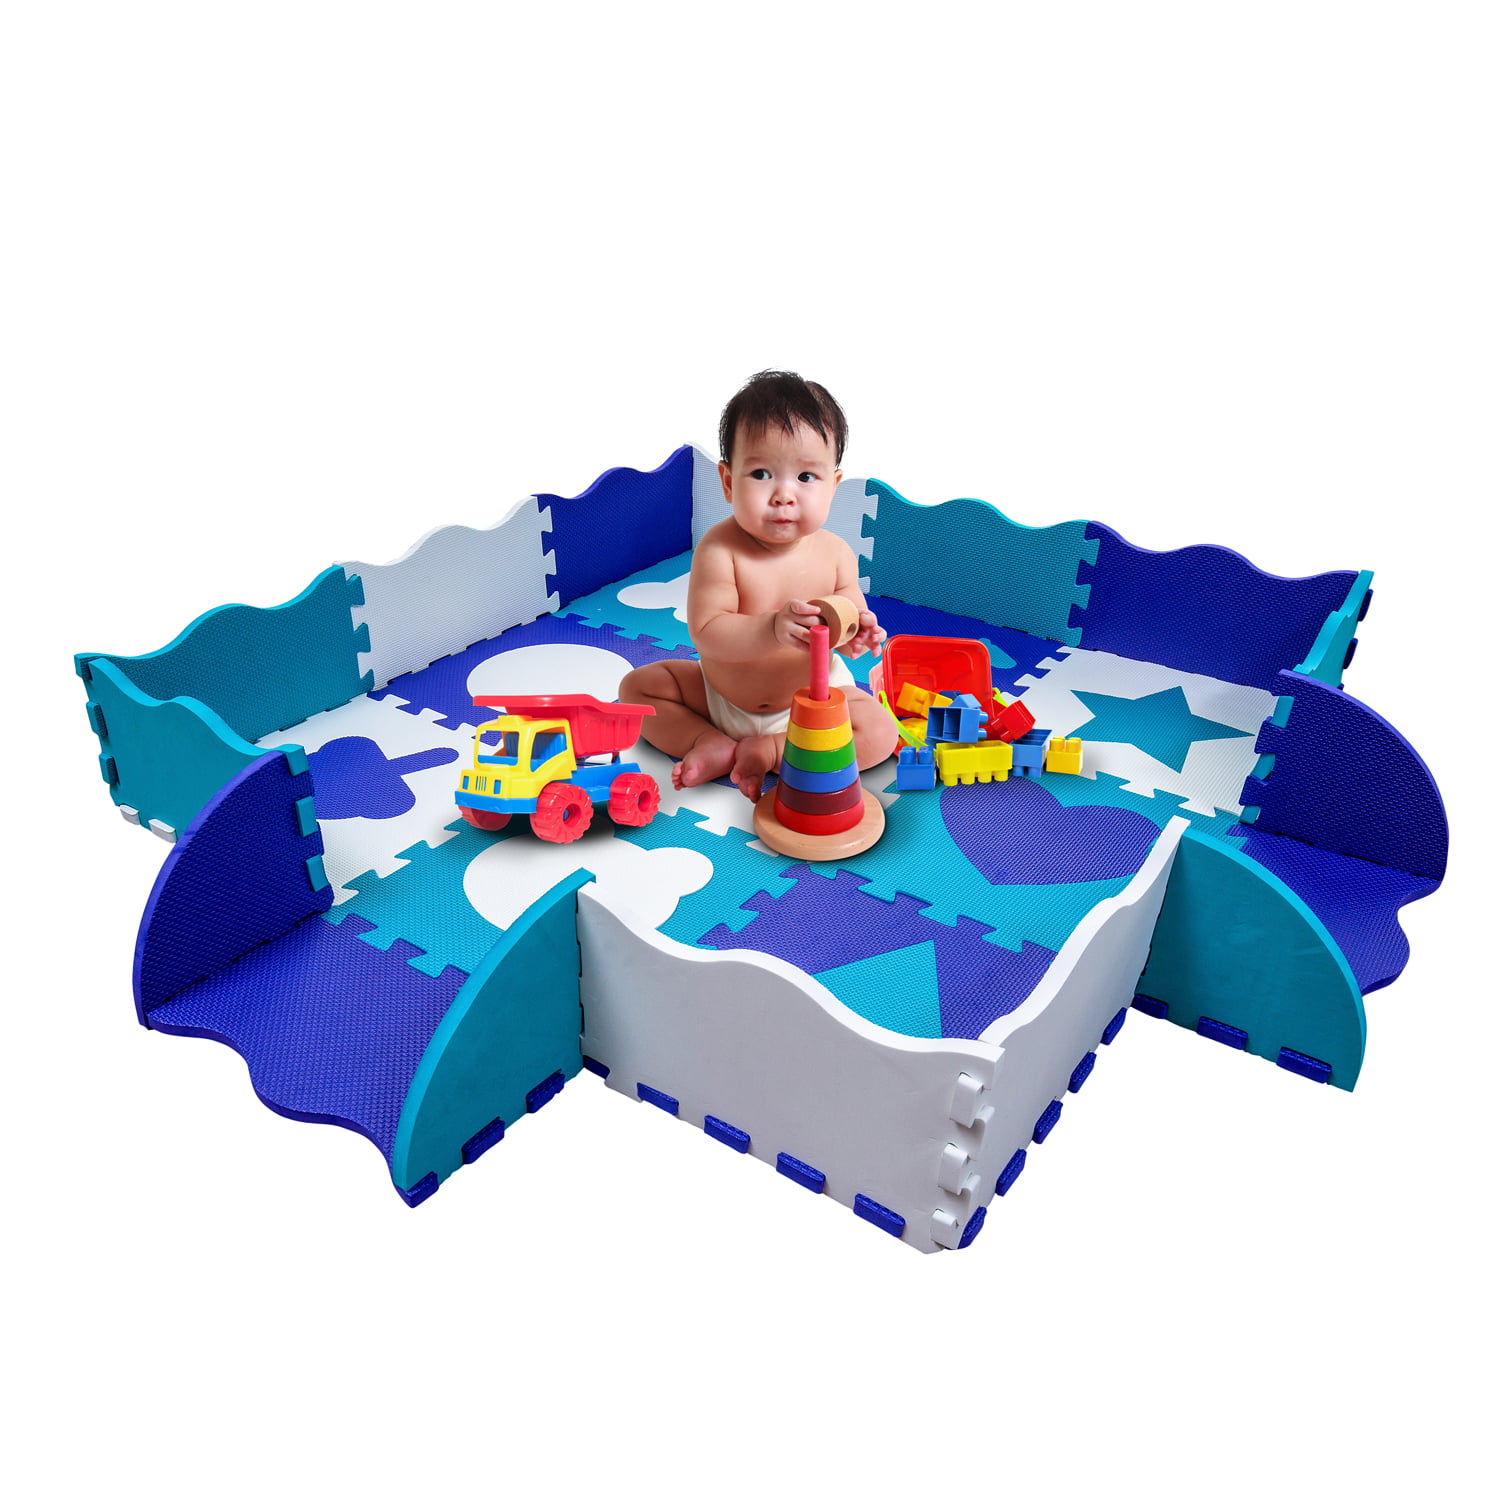 Waterproof Exercise Crawling Playmat for Kids Infants Baby 0.4'' Thick EVA Floor Mat w/Detachable Numbers Costzon 72 Pieces Baby Play Mat w/Fence 72 Pieces, Alphabet + Numbers 